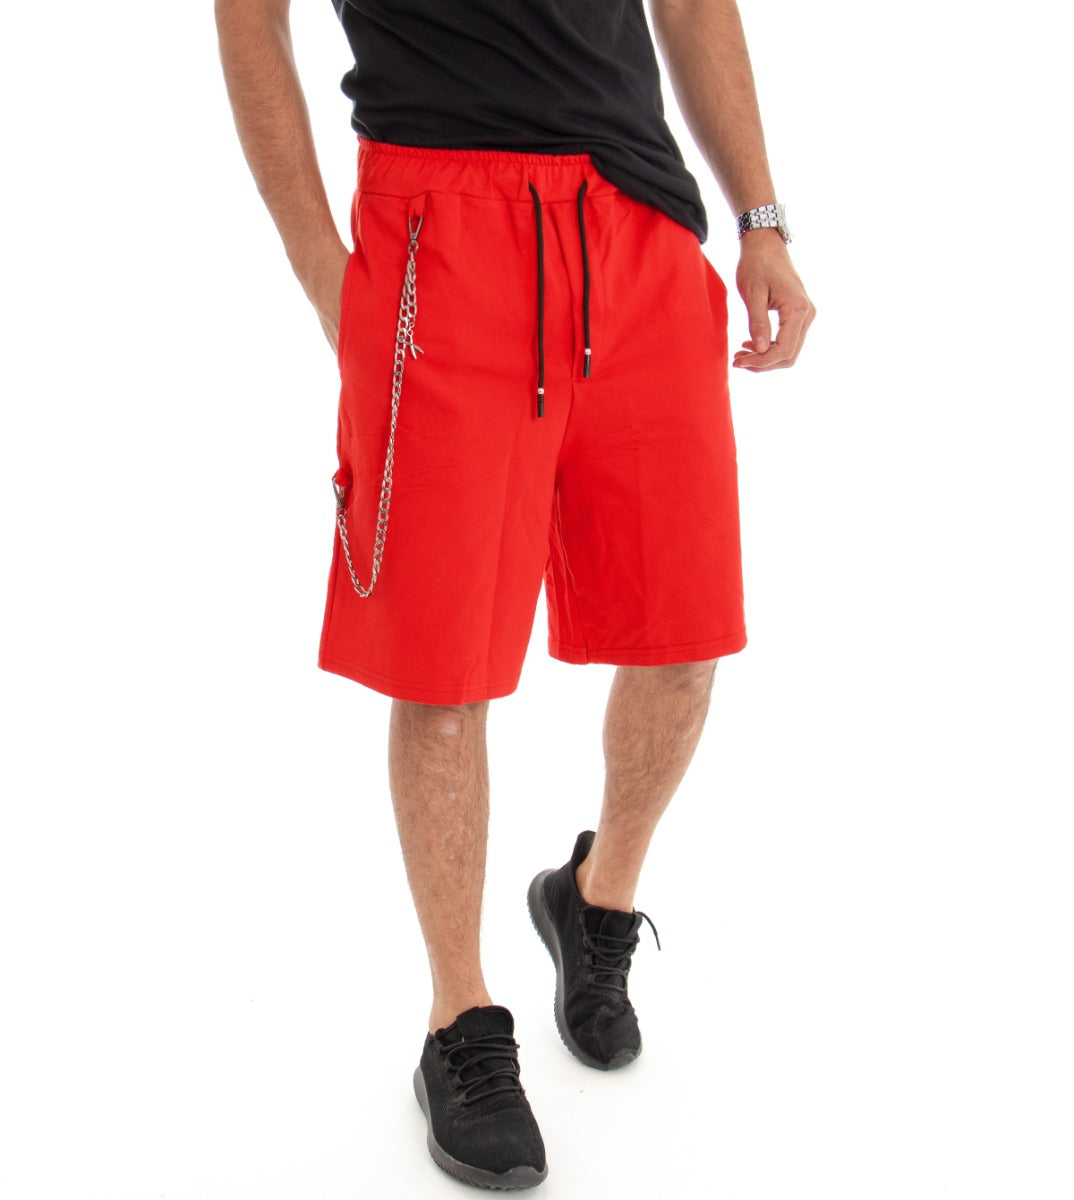 Bermuda Shorts Men's Short Over Solid Color Red Cotton GIOSAL-PC1491A